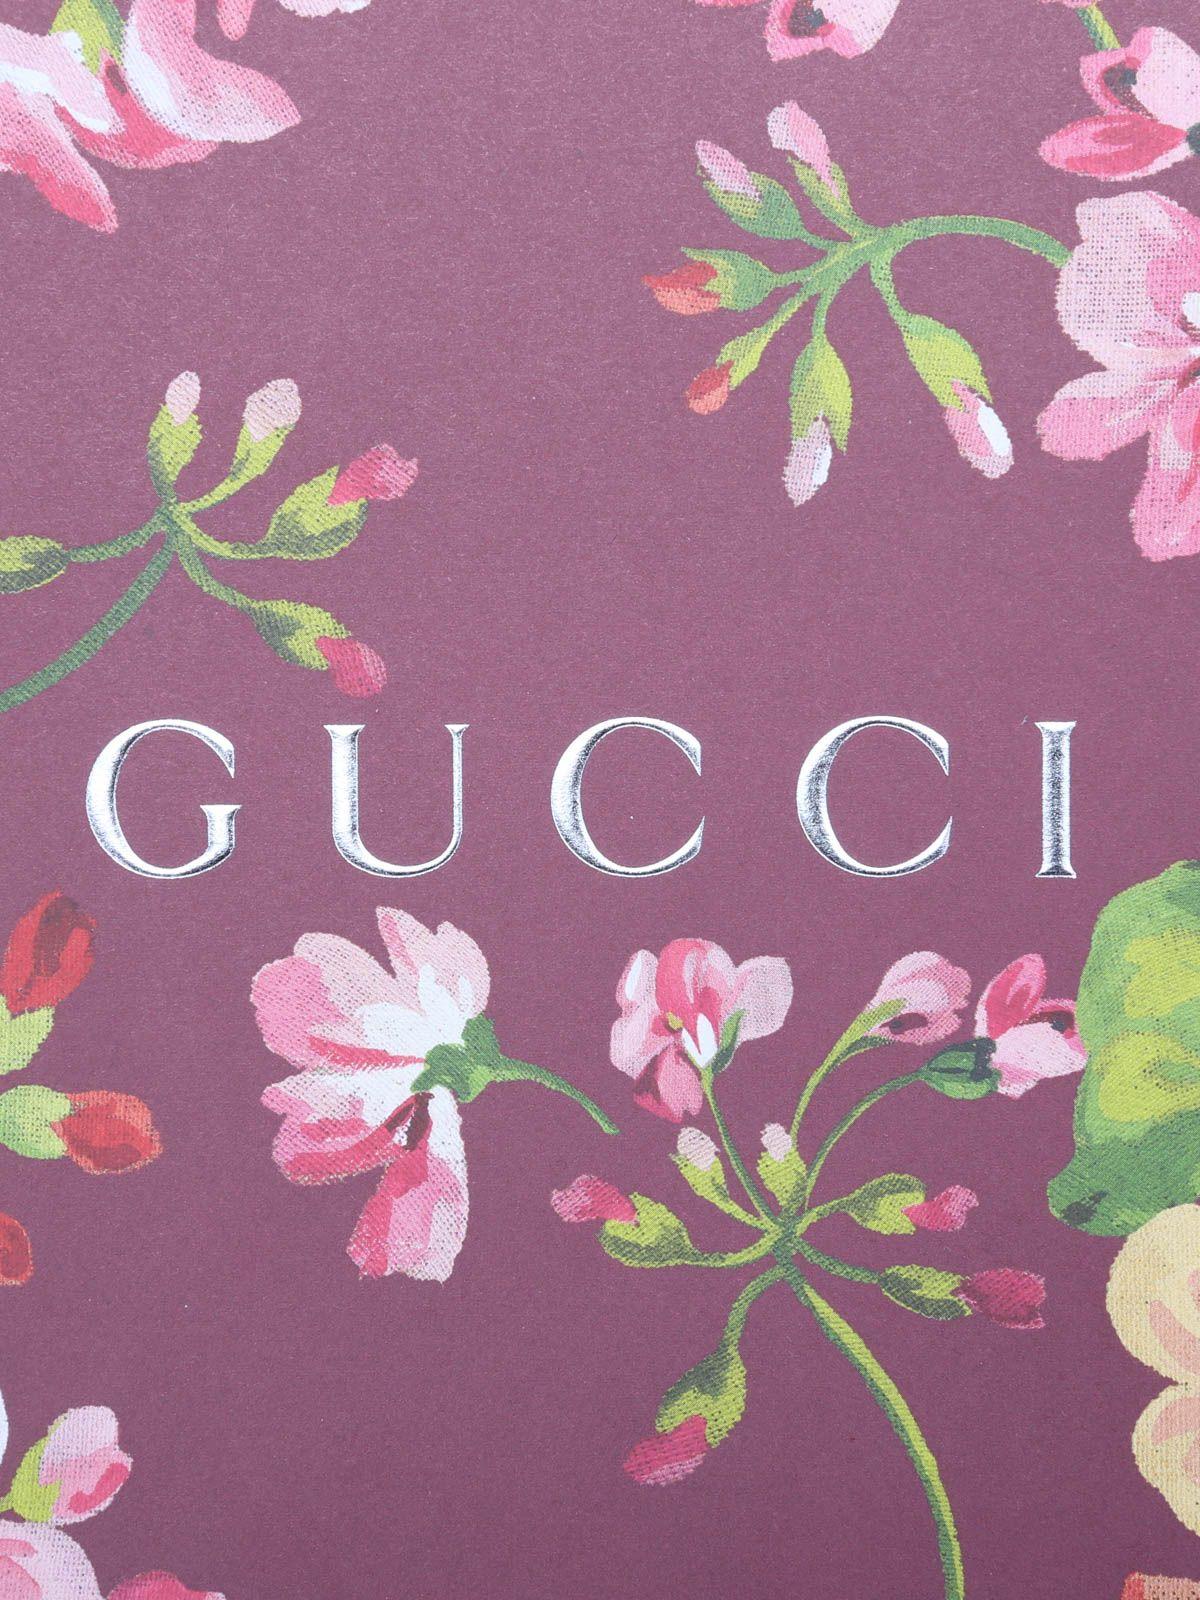 Gucci Flower Wallpapers - Wallpaper Cave